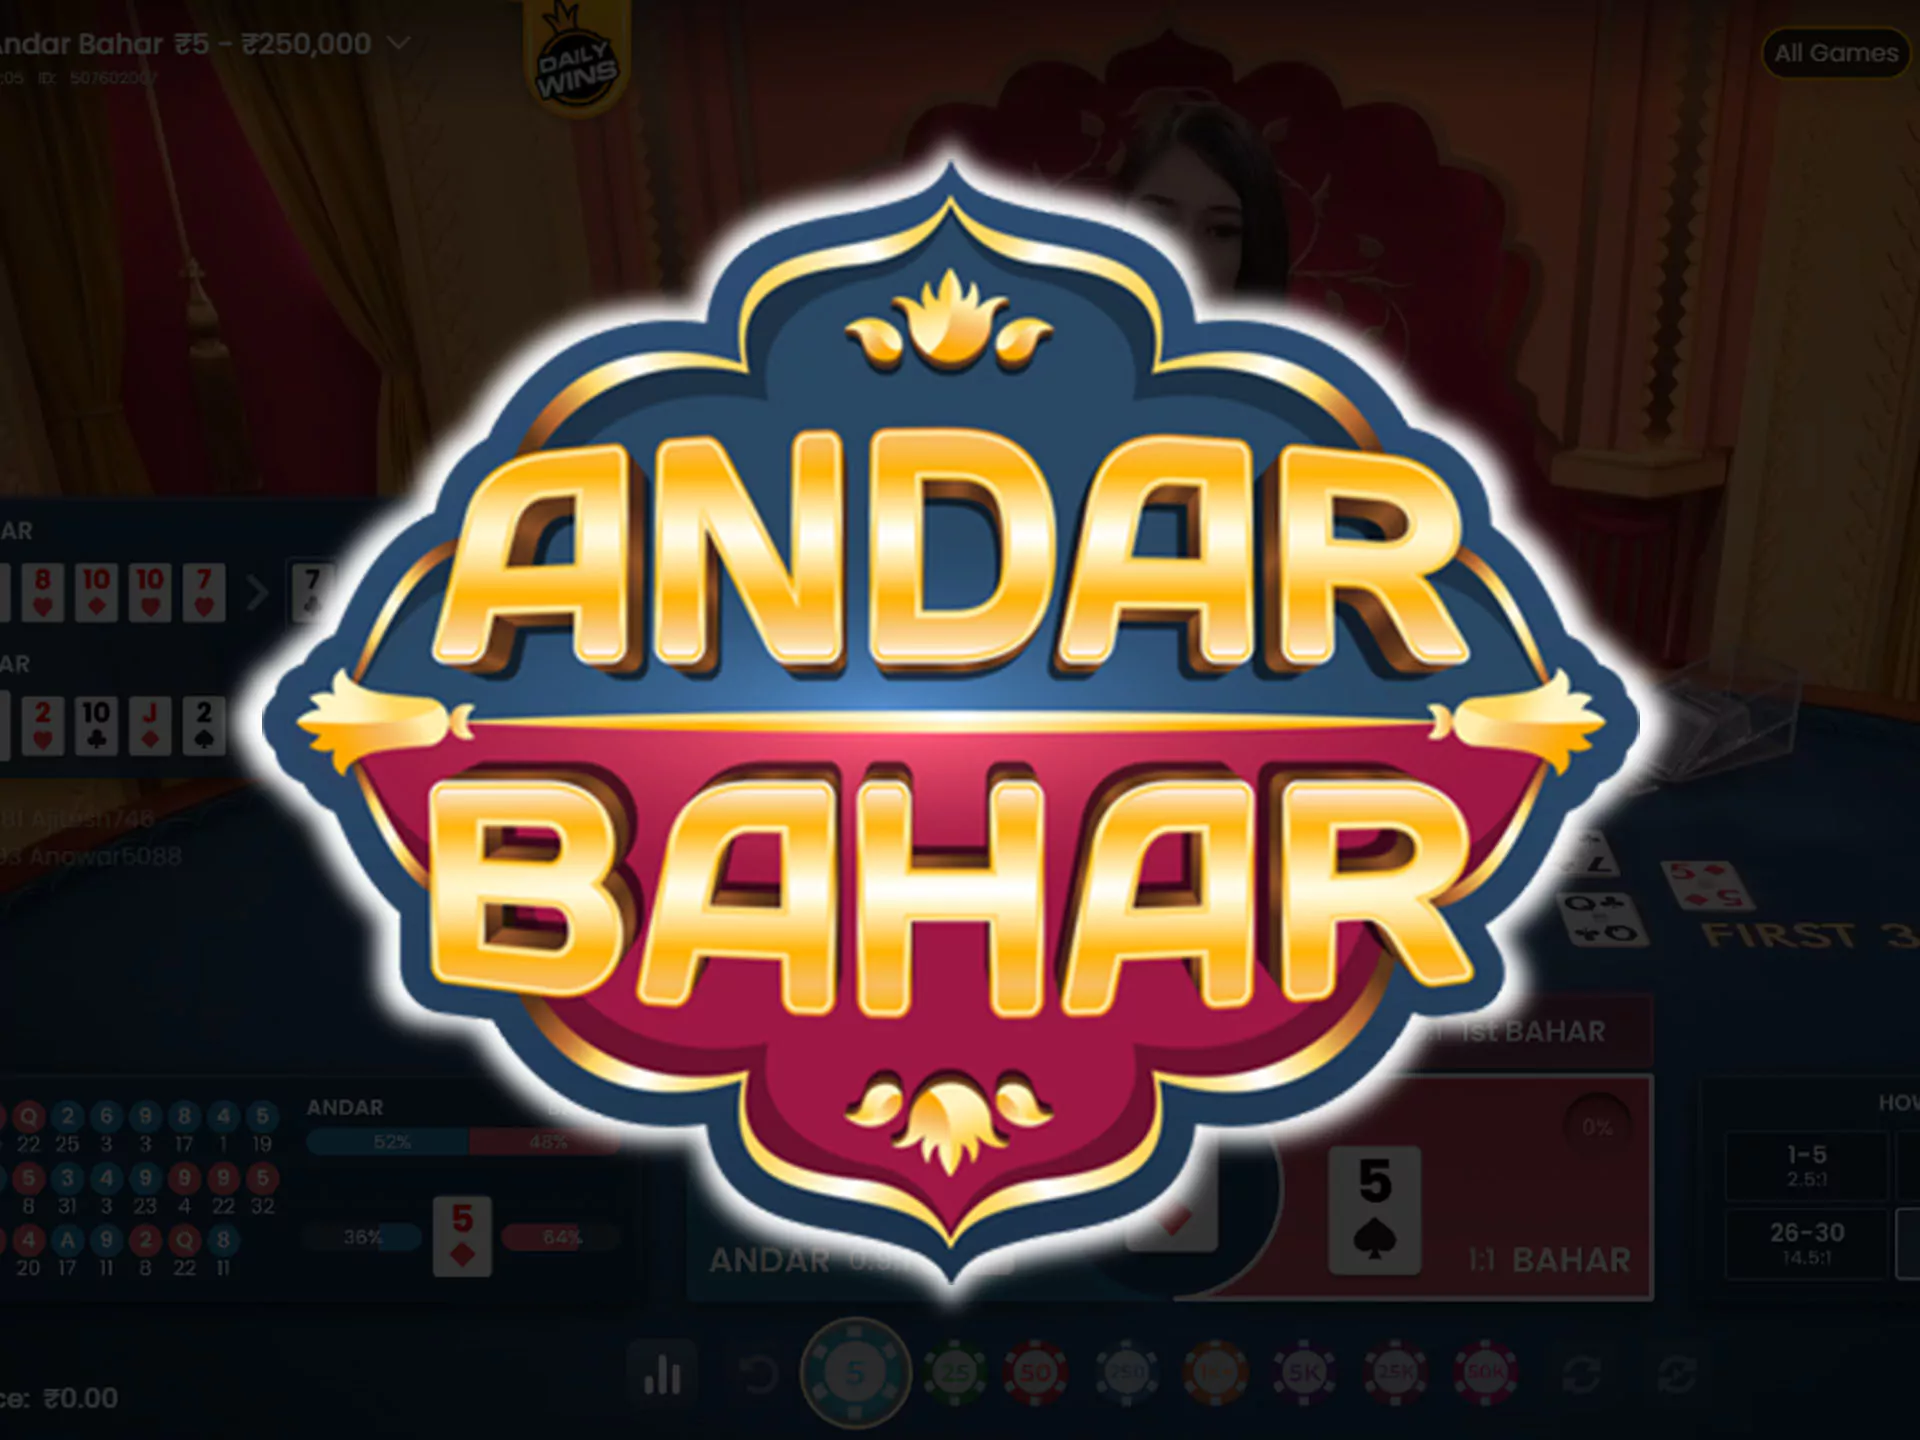 10Cric casino supports the game Andar Bahar.